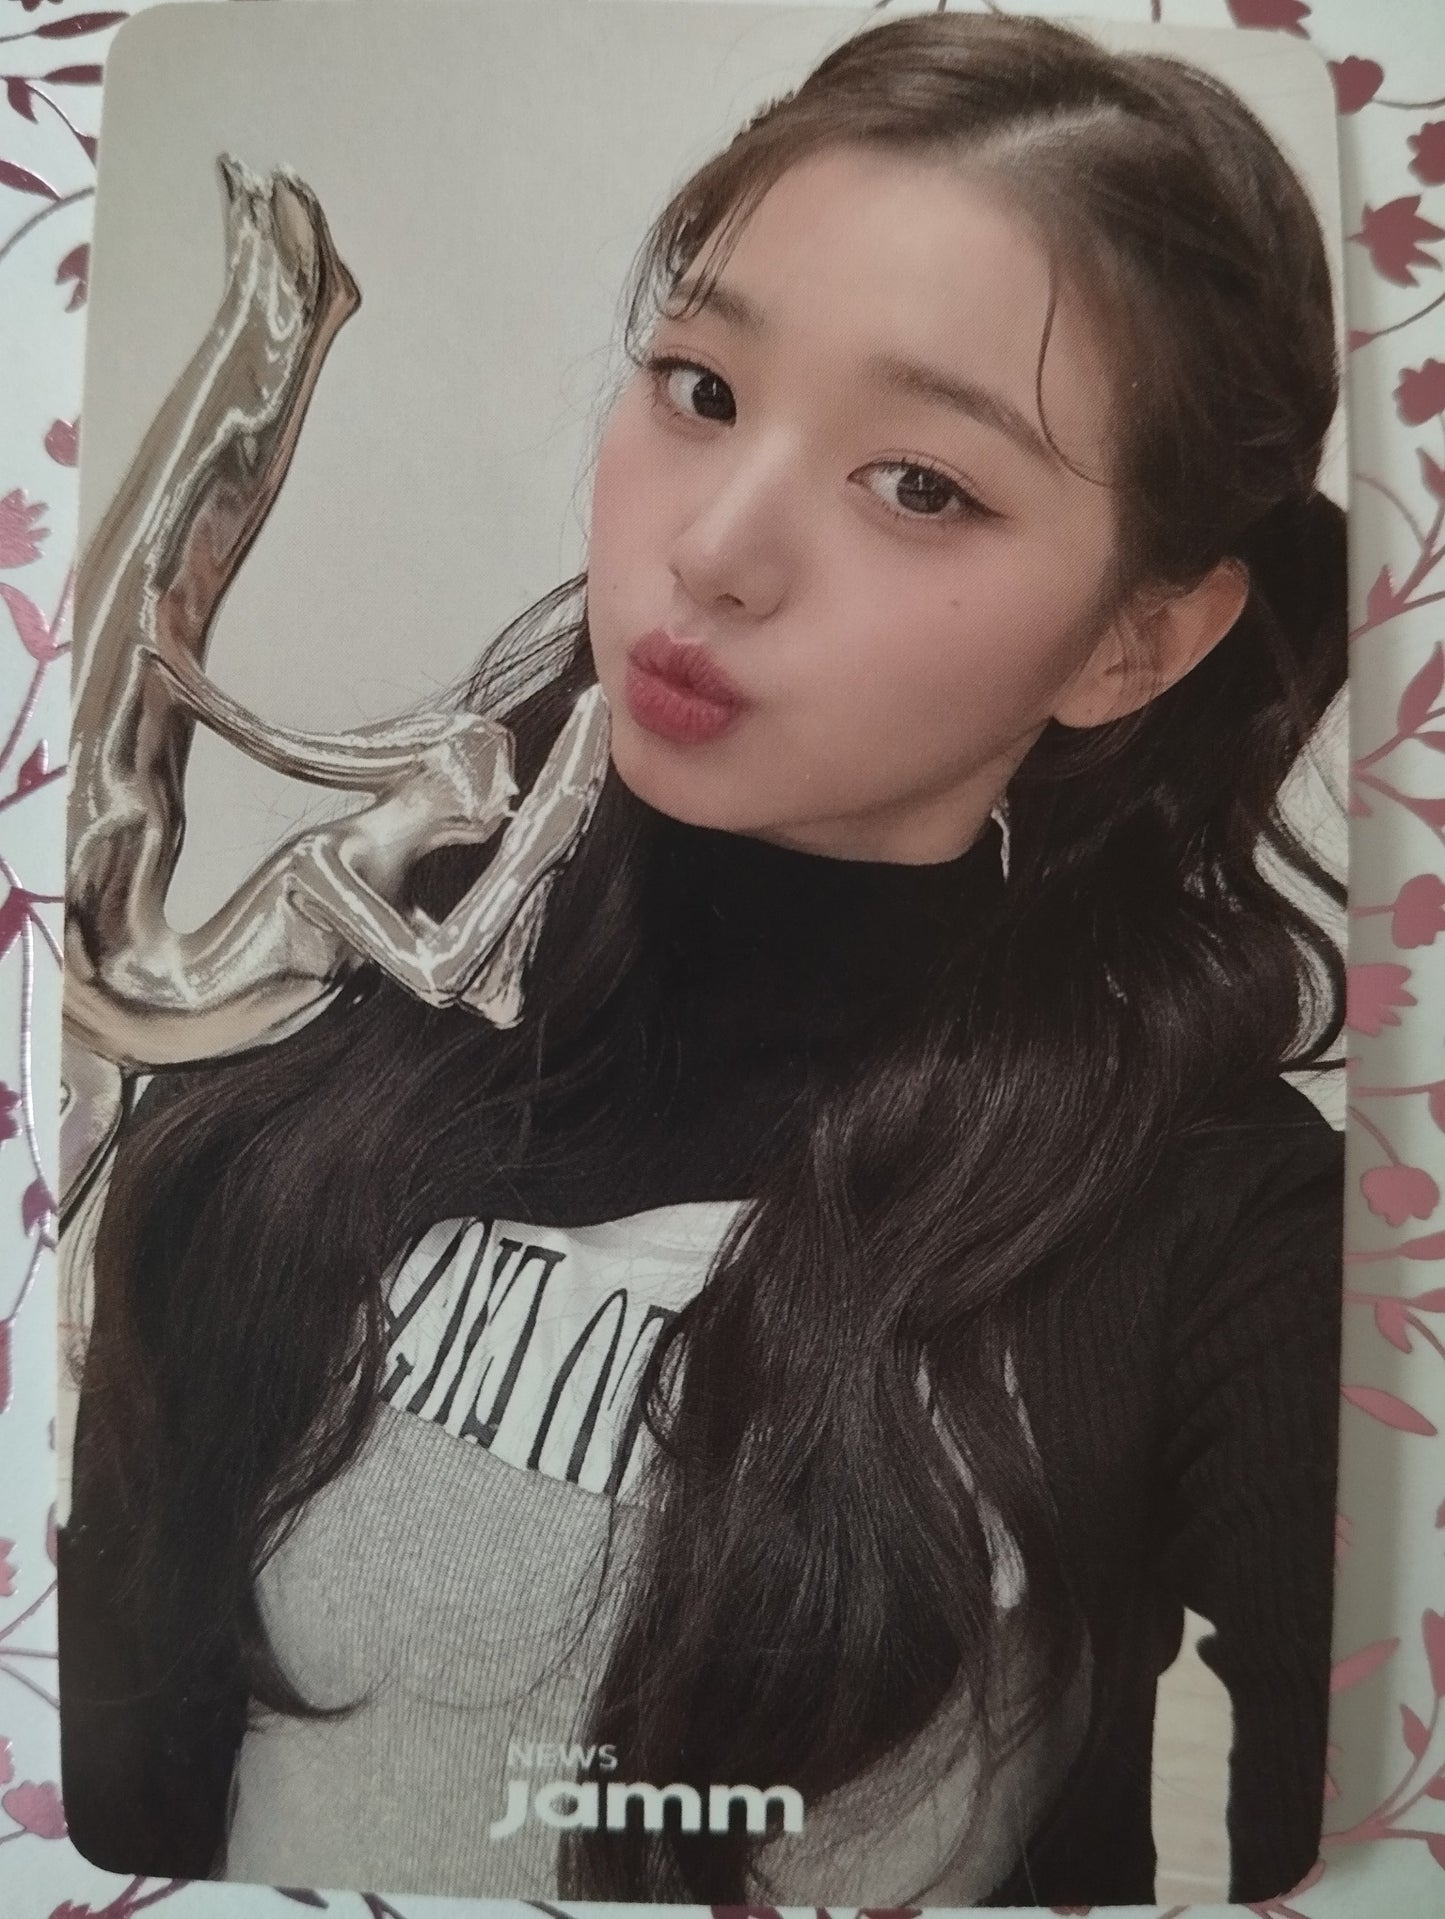 Photocard IVE The first album Jang wonyoung